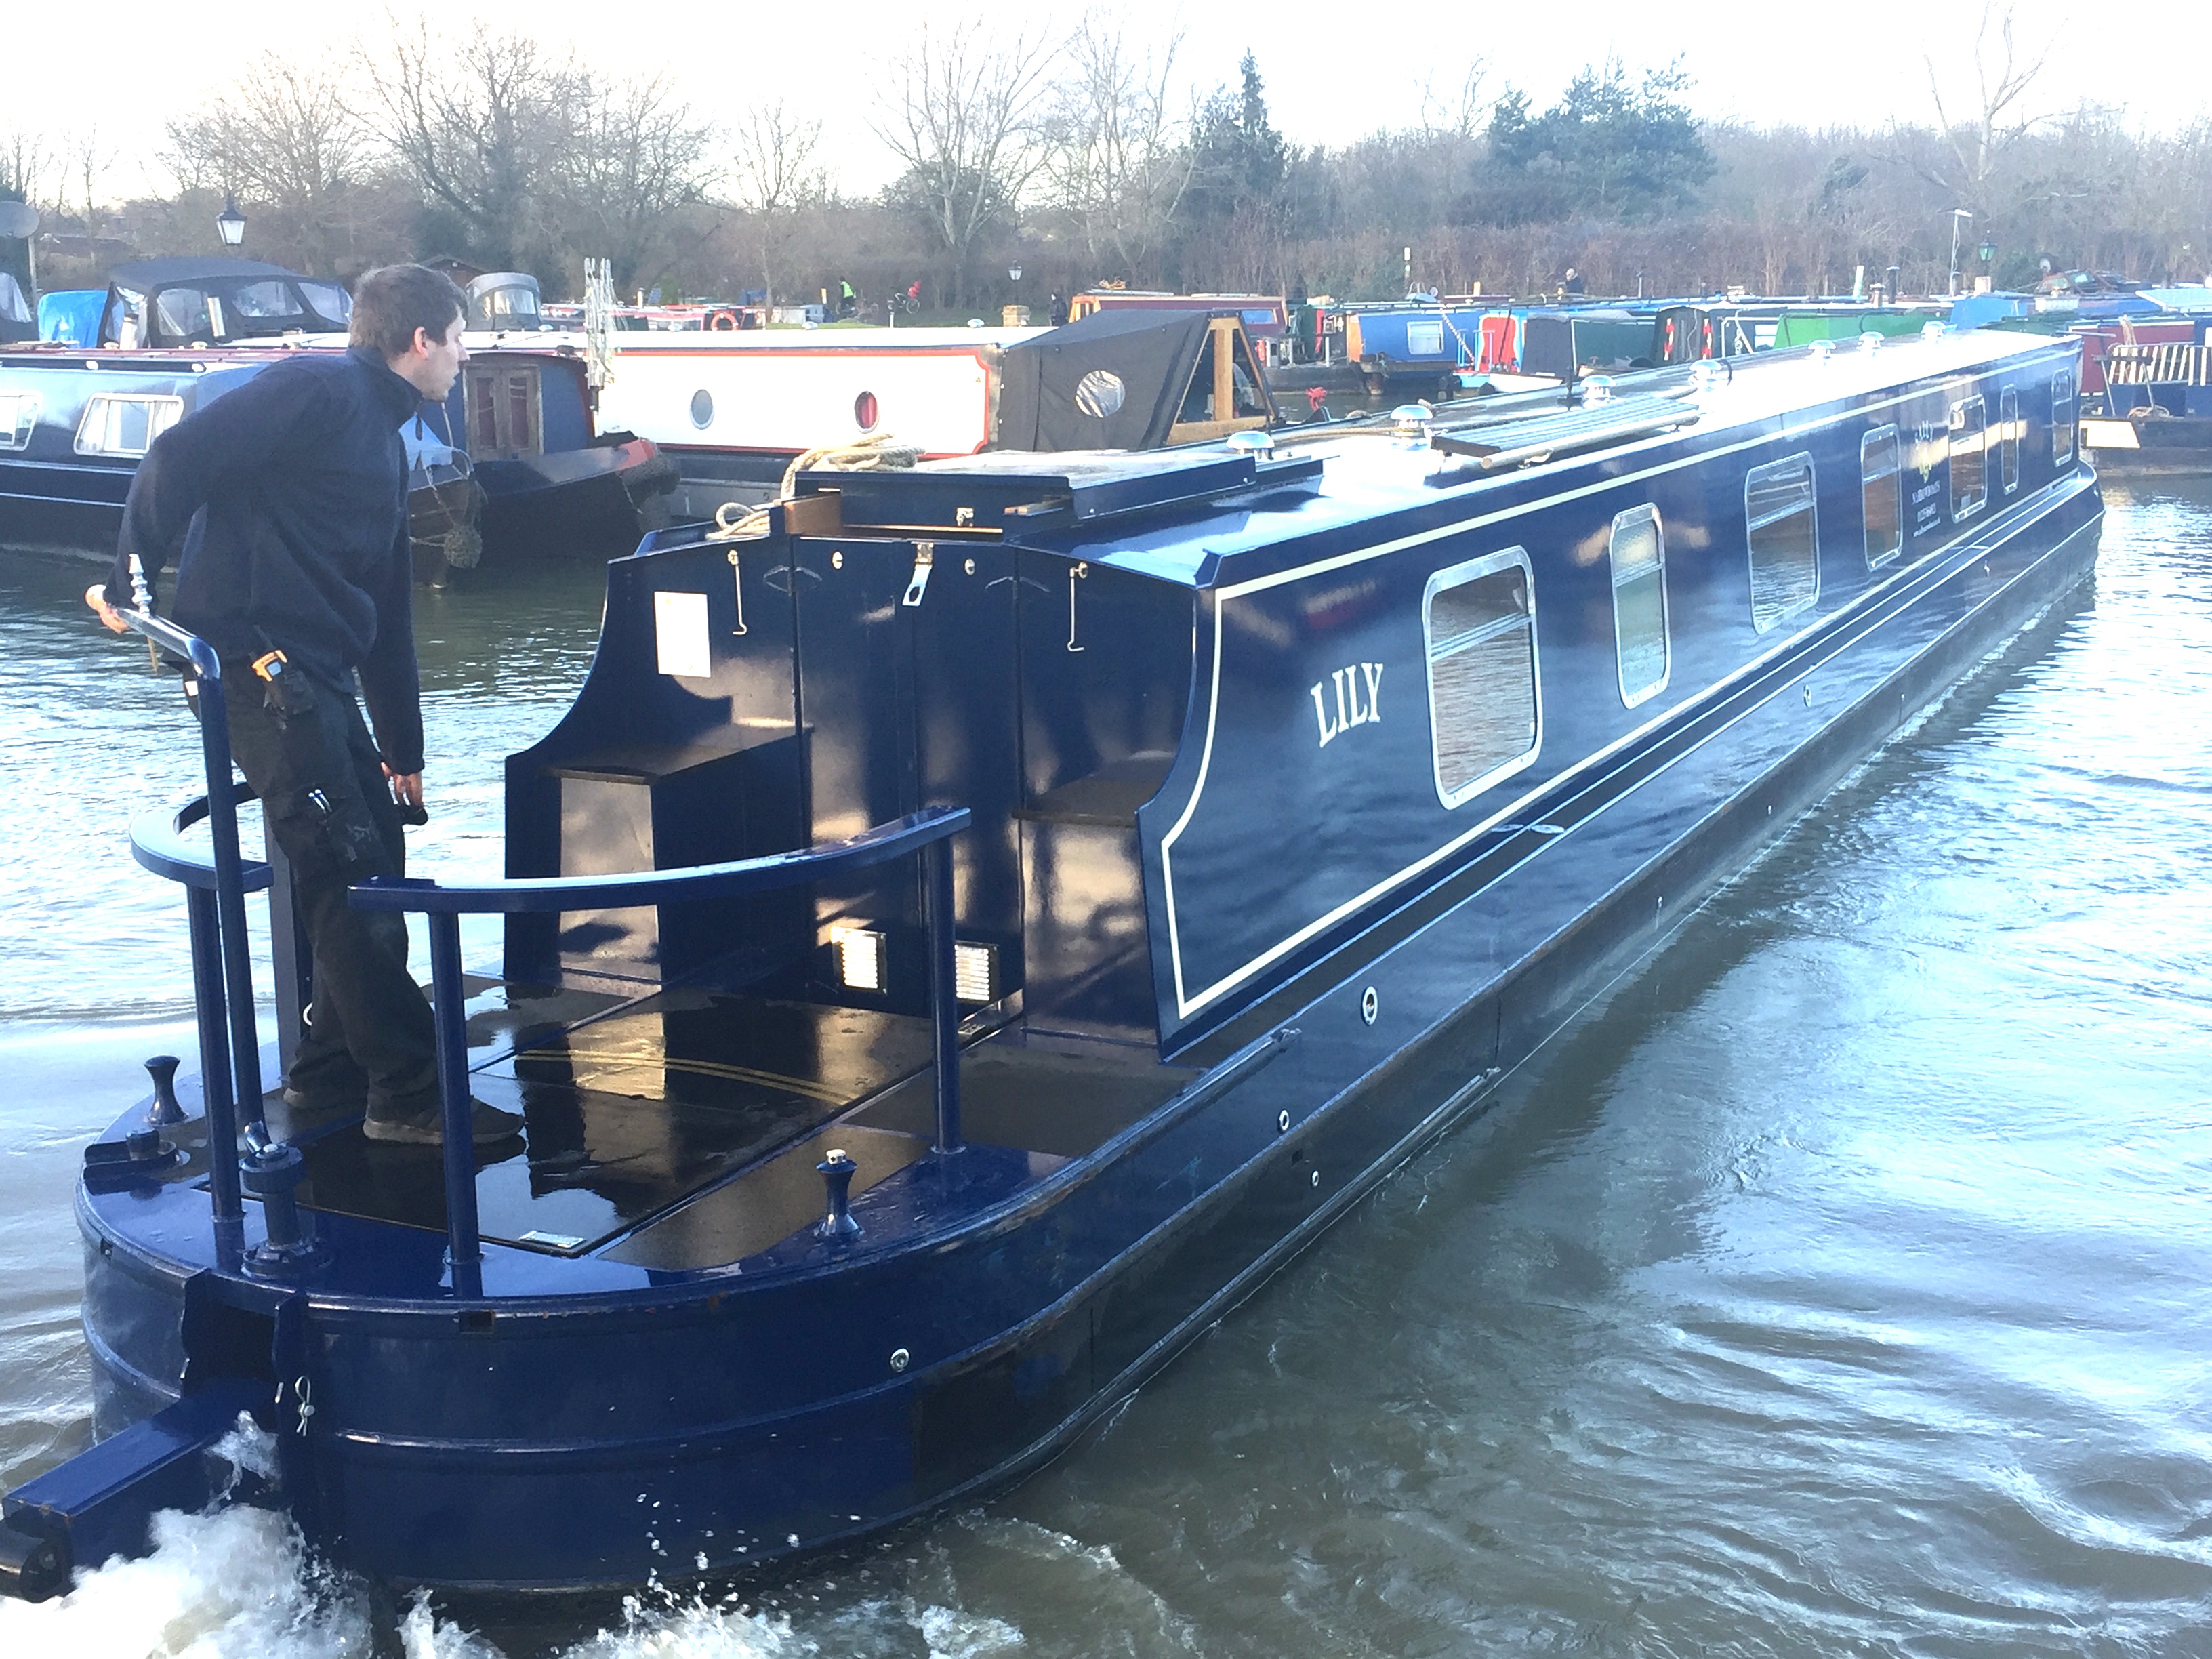 The S-Lily class canal boat